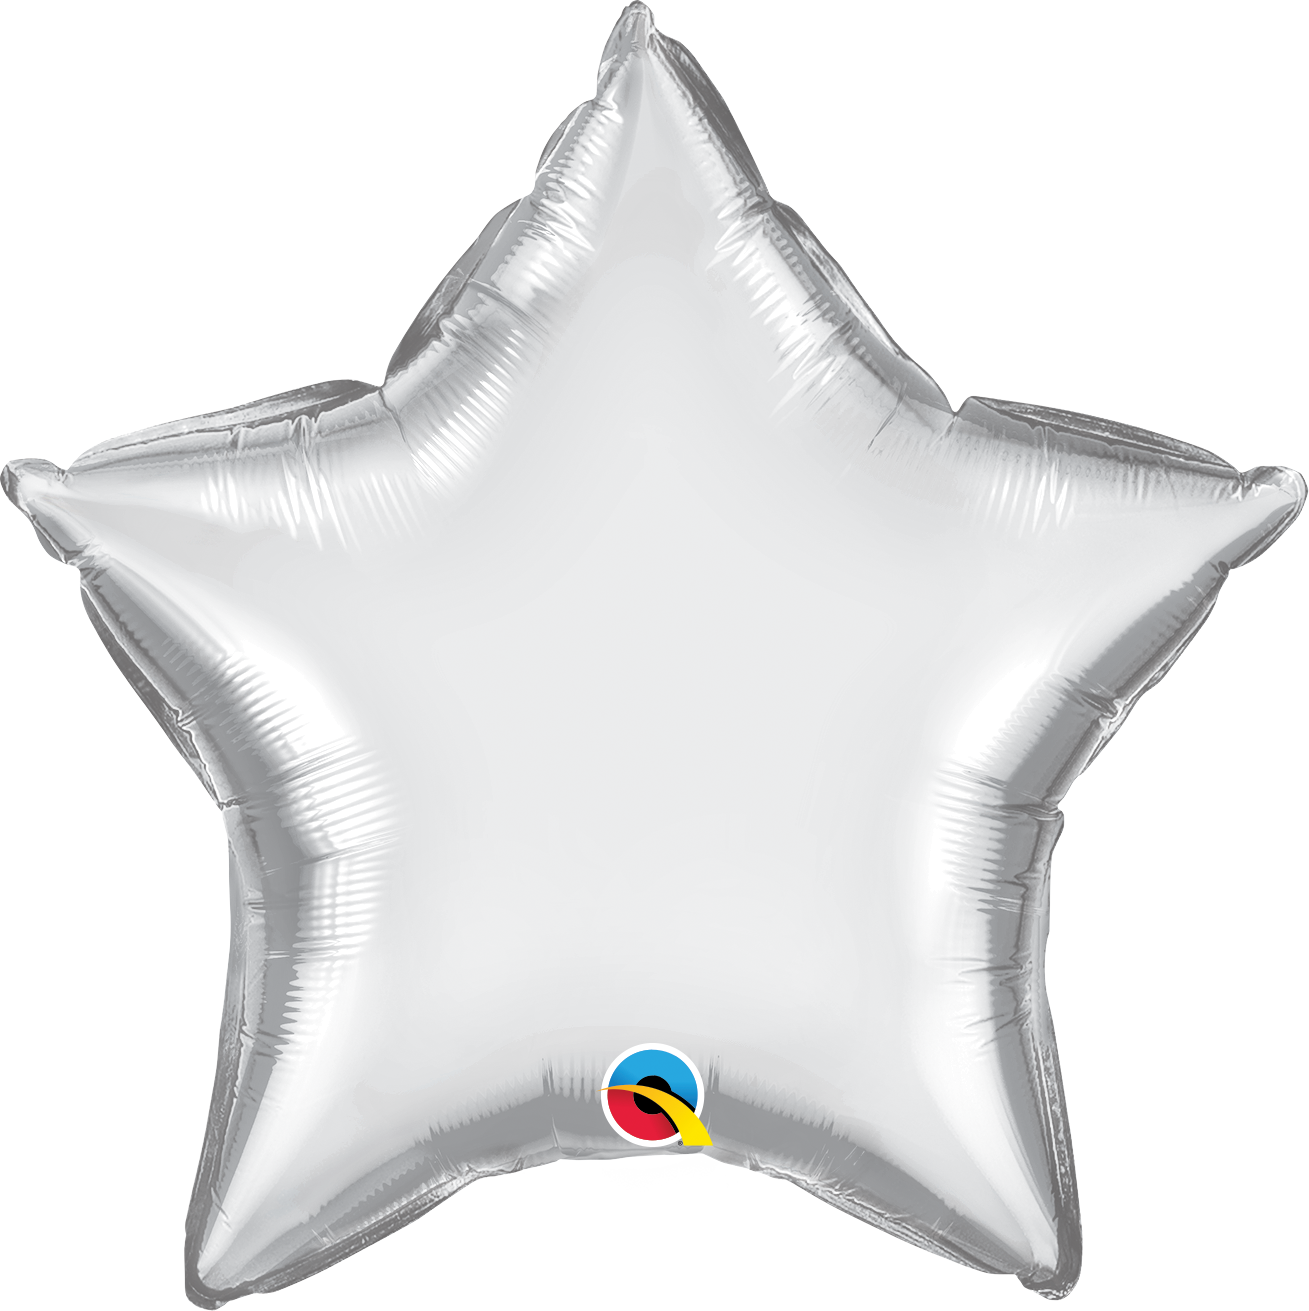 20" Qualatex Chrome Star Foil Balloons | Buy 5 Or More Save 20%